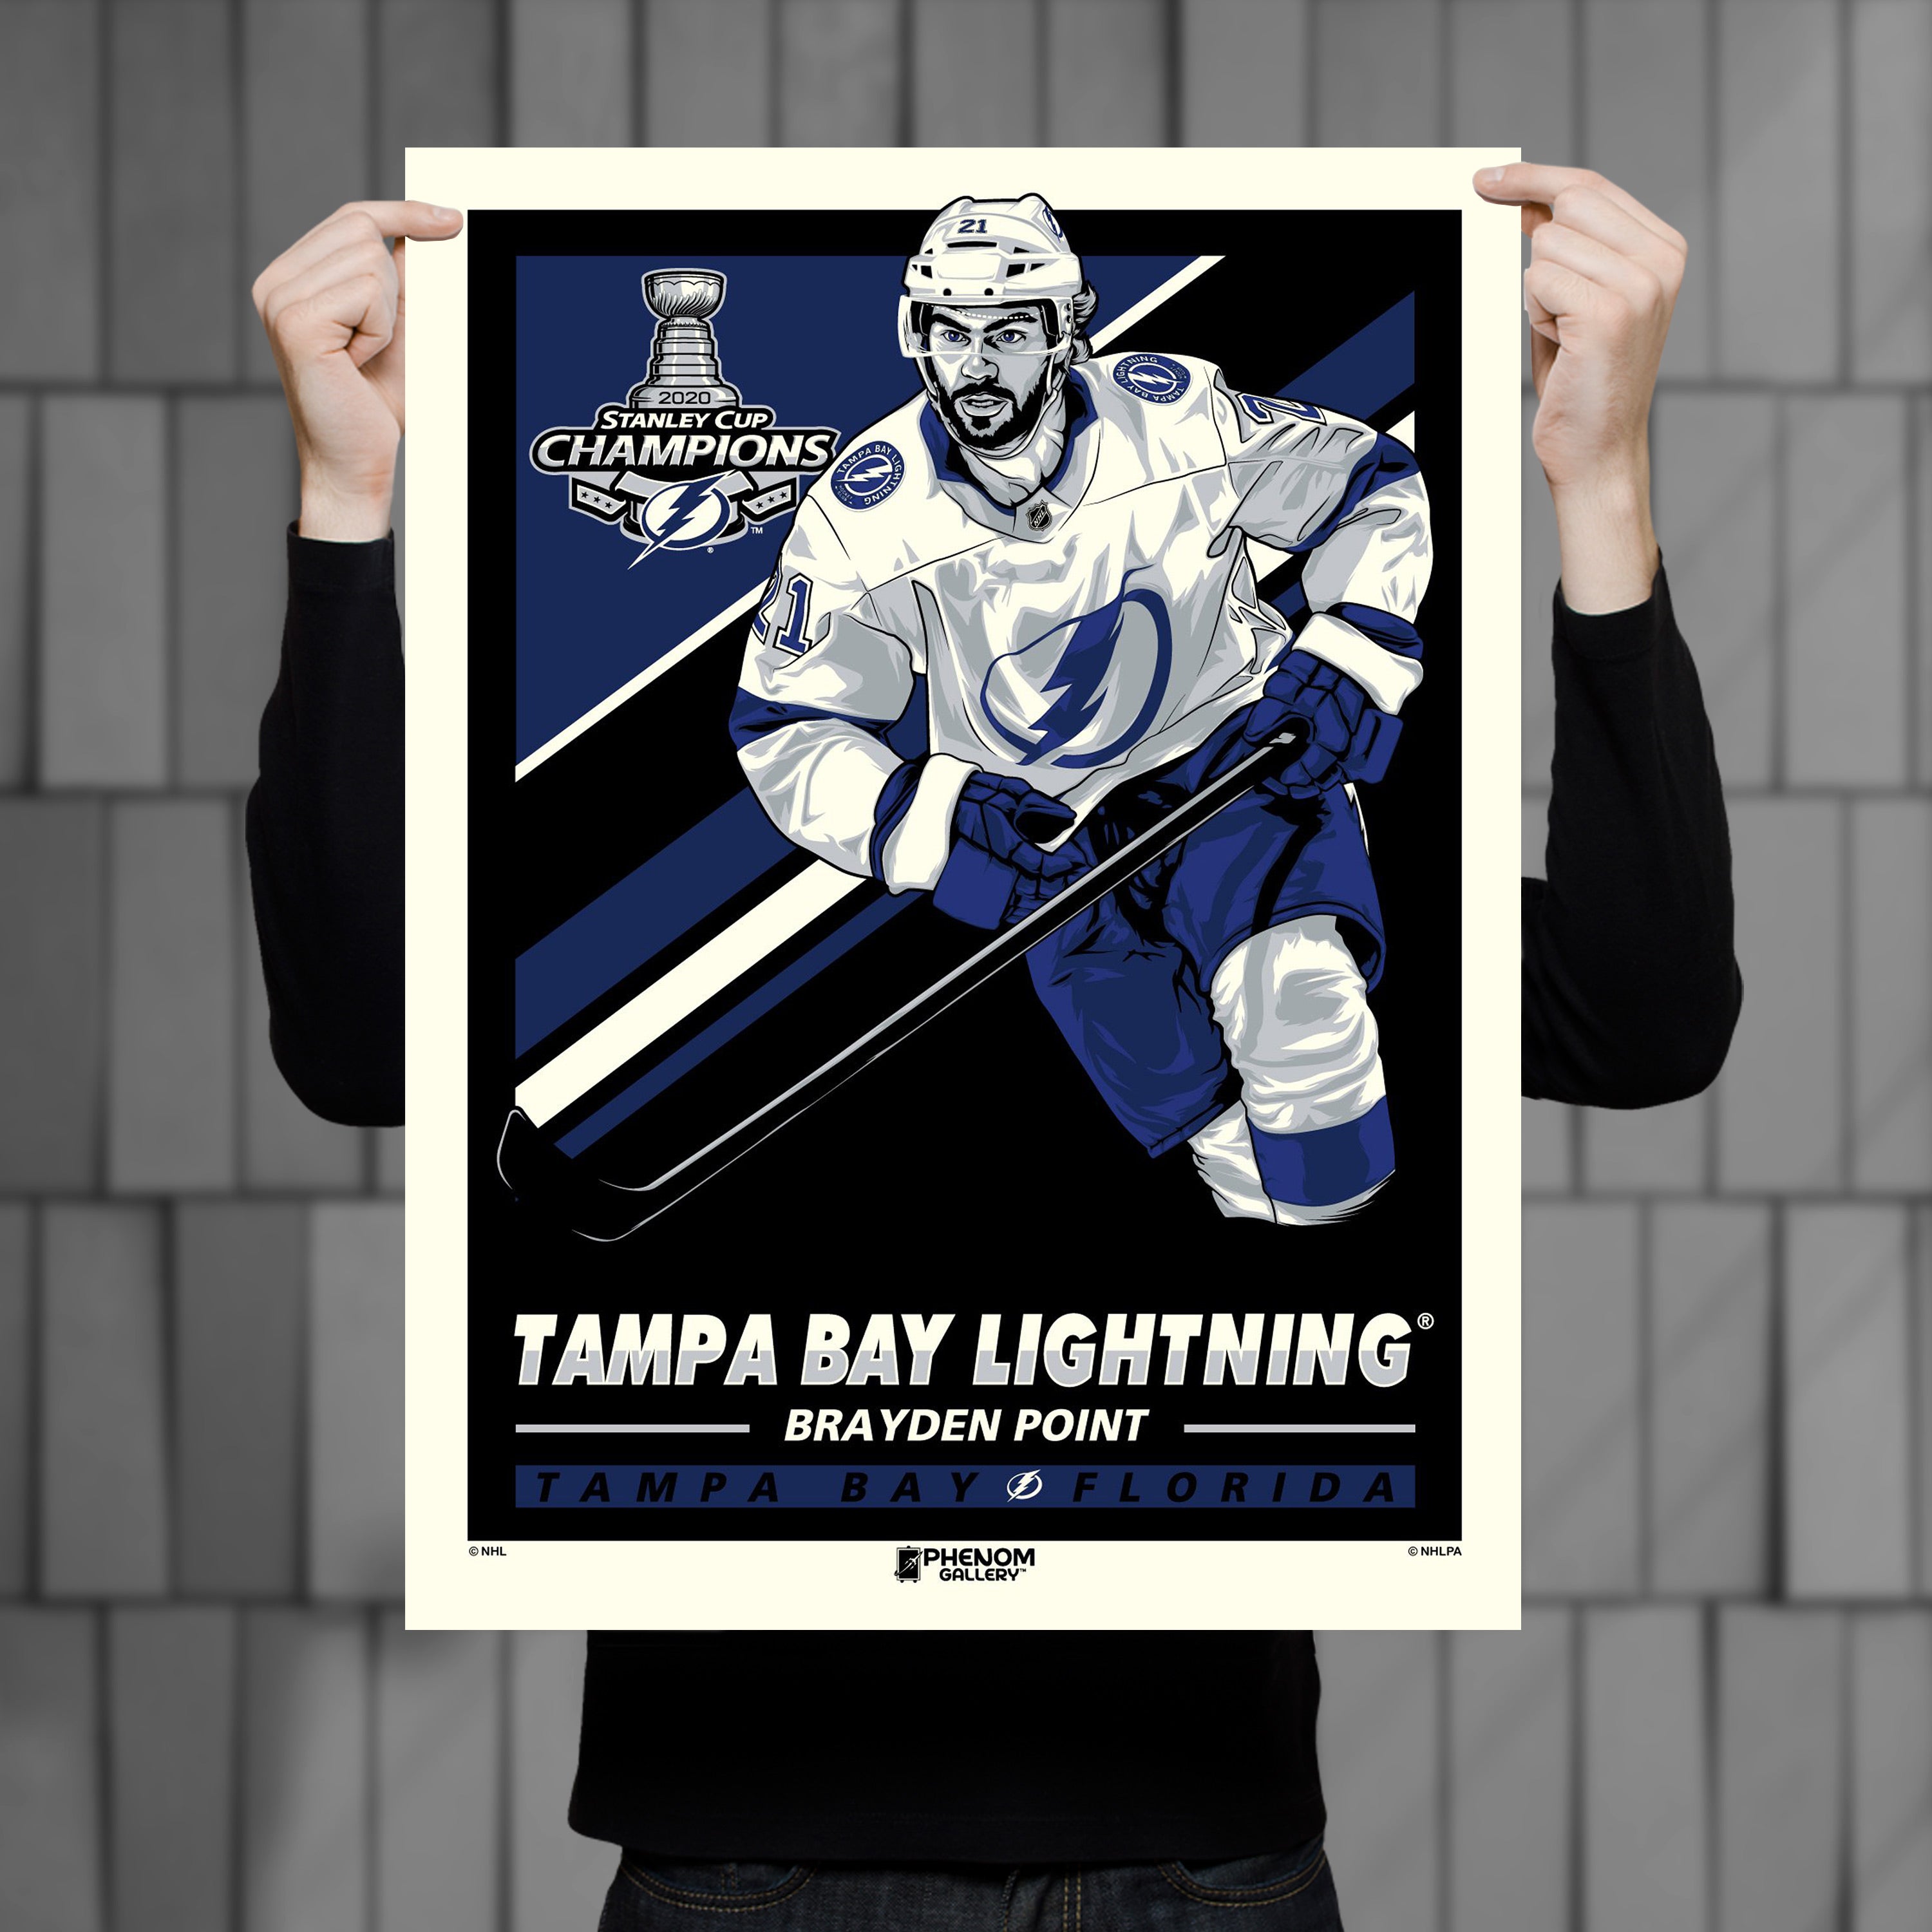 Lids Brayden Point Tampa Bay Lightning Phenom Gallery 2020 Stanley Cup  Champions 18'' x 24'' Limited Edition Serigraph Print Artwork Poster